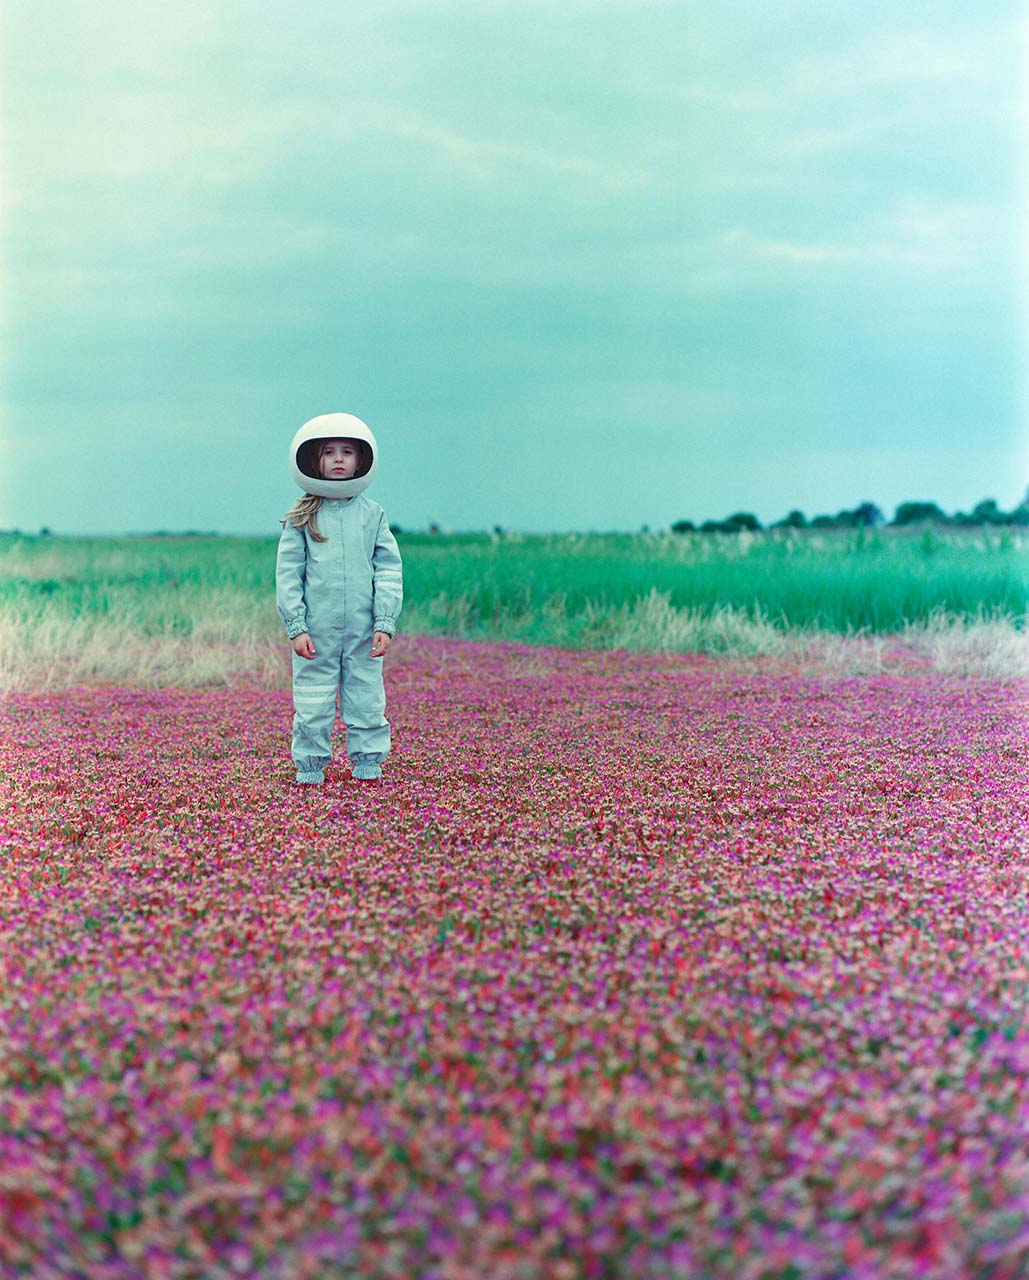 A young girl wearing a spacesuit costume and helmet stands in a field of purple flowers under an overcast sky